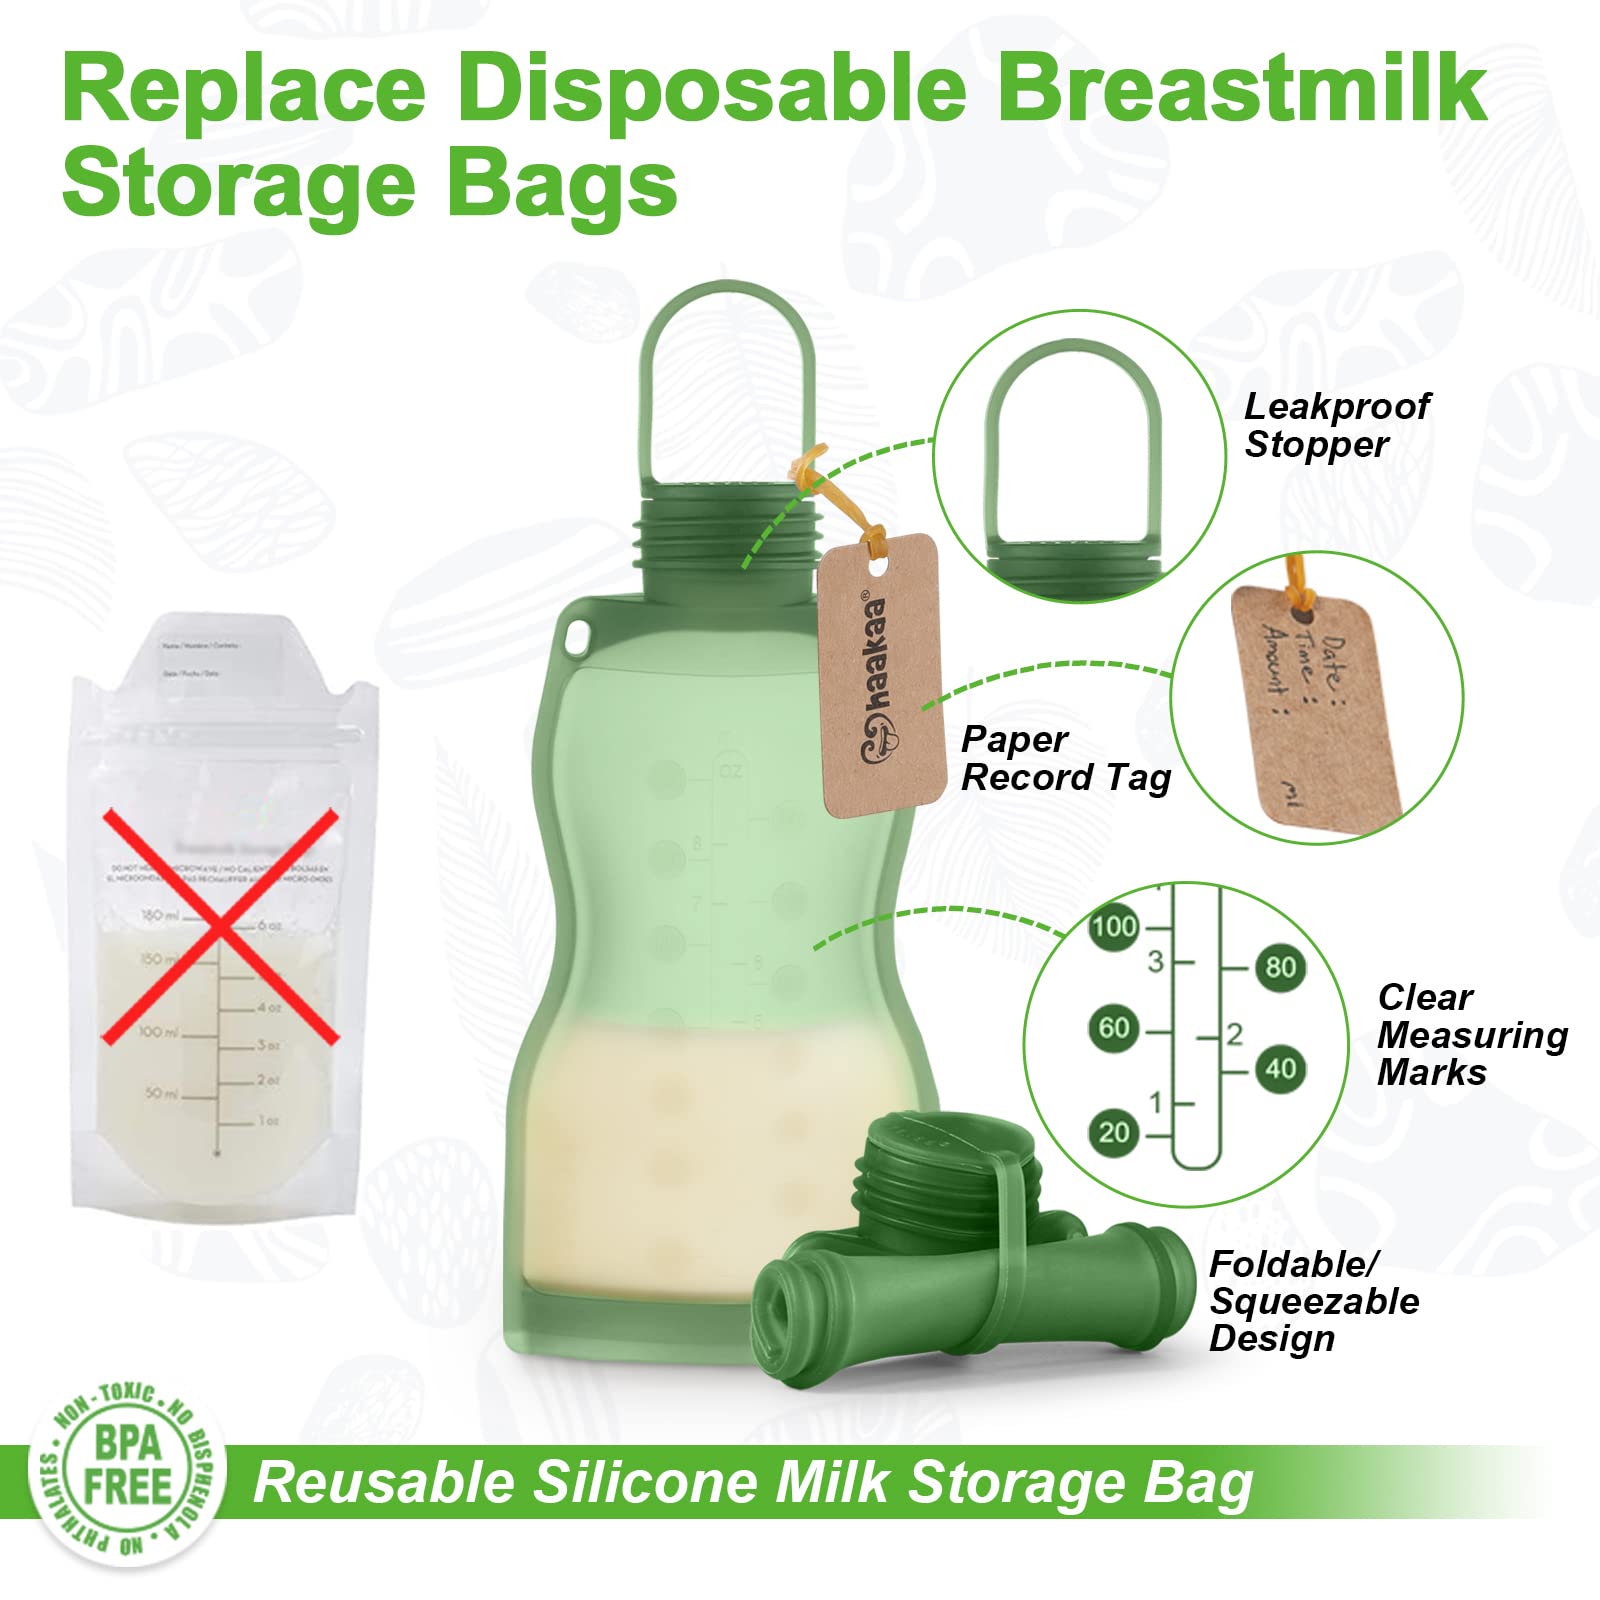 haakaa Silicone Breast Milk Storage Bag&Happii Bear Silicone Breast Milk Storage Bag Set-Reusable Milk Collector Freezer Bag for Breastfeeding Mom|Refillable Baby Food Squeeze Pouch